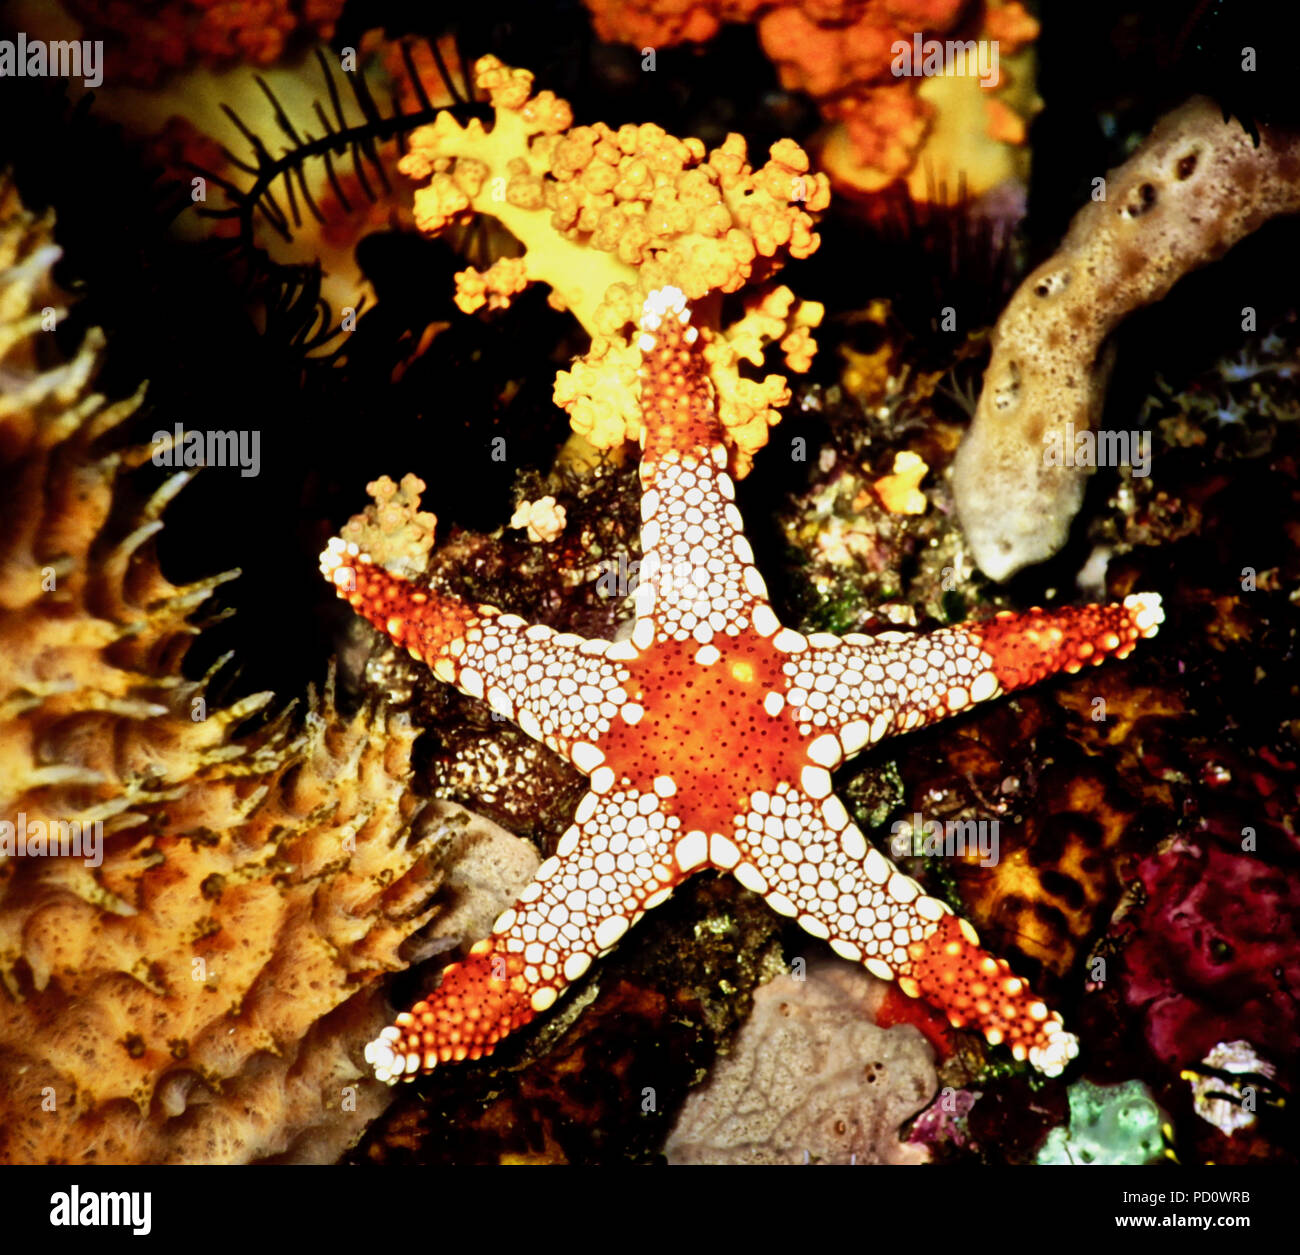 A pearl sea star (Fromia monilis: 18cms.) showing its characteristic red central area and many distinct plates on the five arms. Sea stars can grow a new arm if one is eaten by a predator. Four-armed individuals can be seen occasionally which have suffered this fate and are in the process of regenerating the missing fifth. The animal lives on coral reefs or other rocky places where it feeds on sponges and small invertebrates - its mouth being on the underside of the central red area. It moves on the substrate by means of hundreds of hydraulically-controlled tube feet. Tulamben, Bali, Indonesia Stock Photo